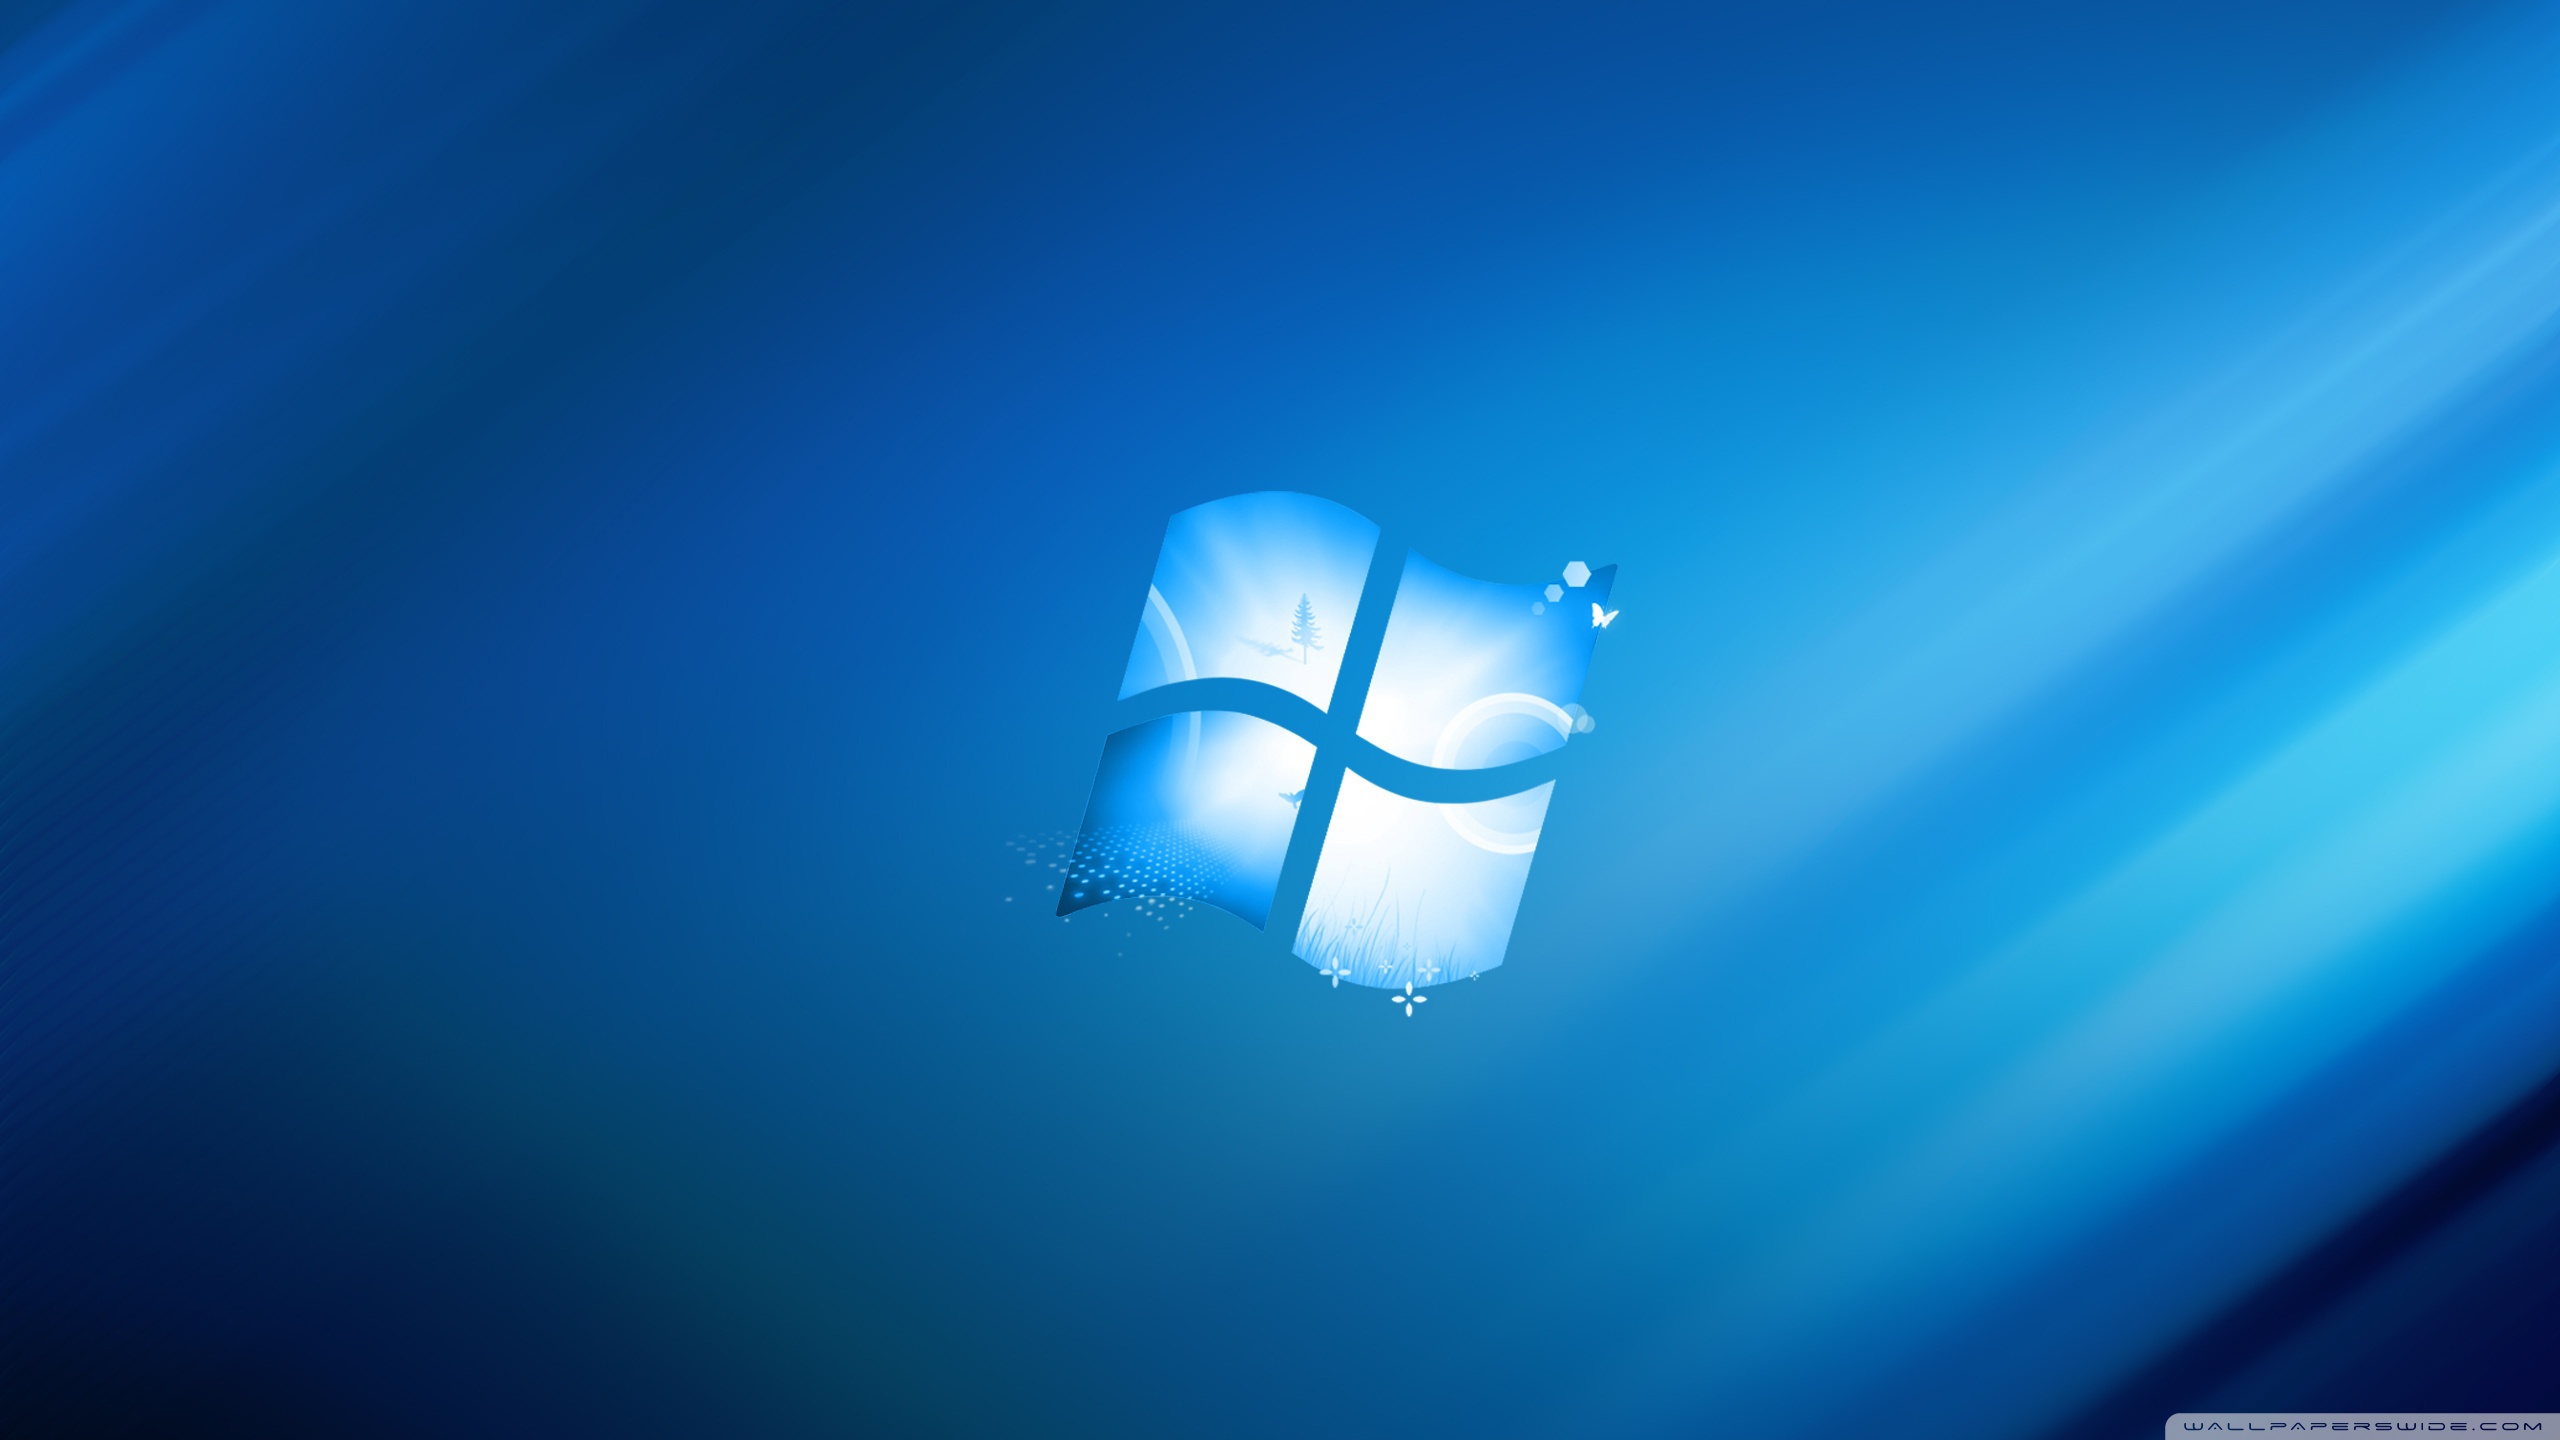 Windows Blue Theme Wallpaper And Image Pictures